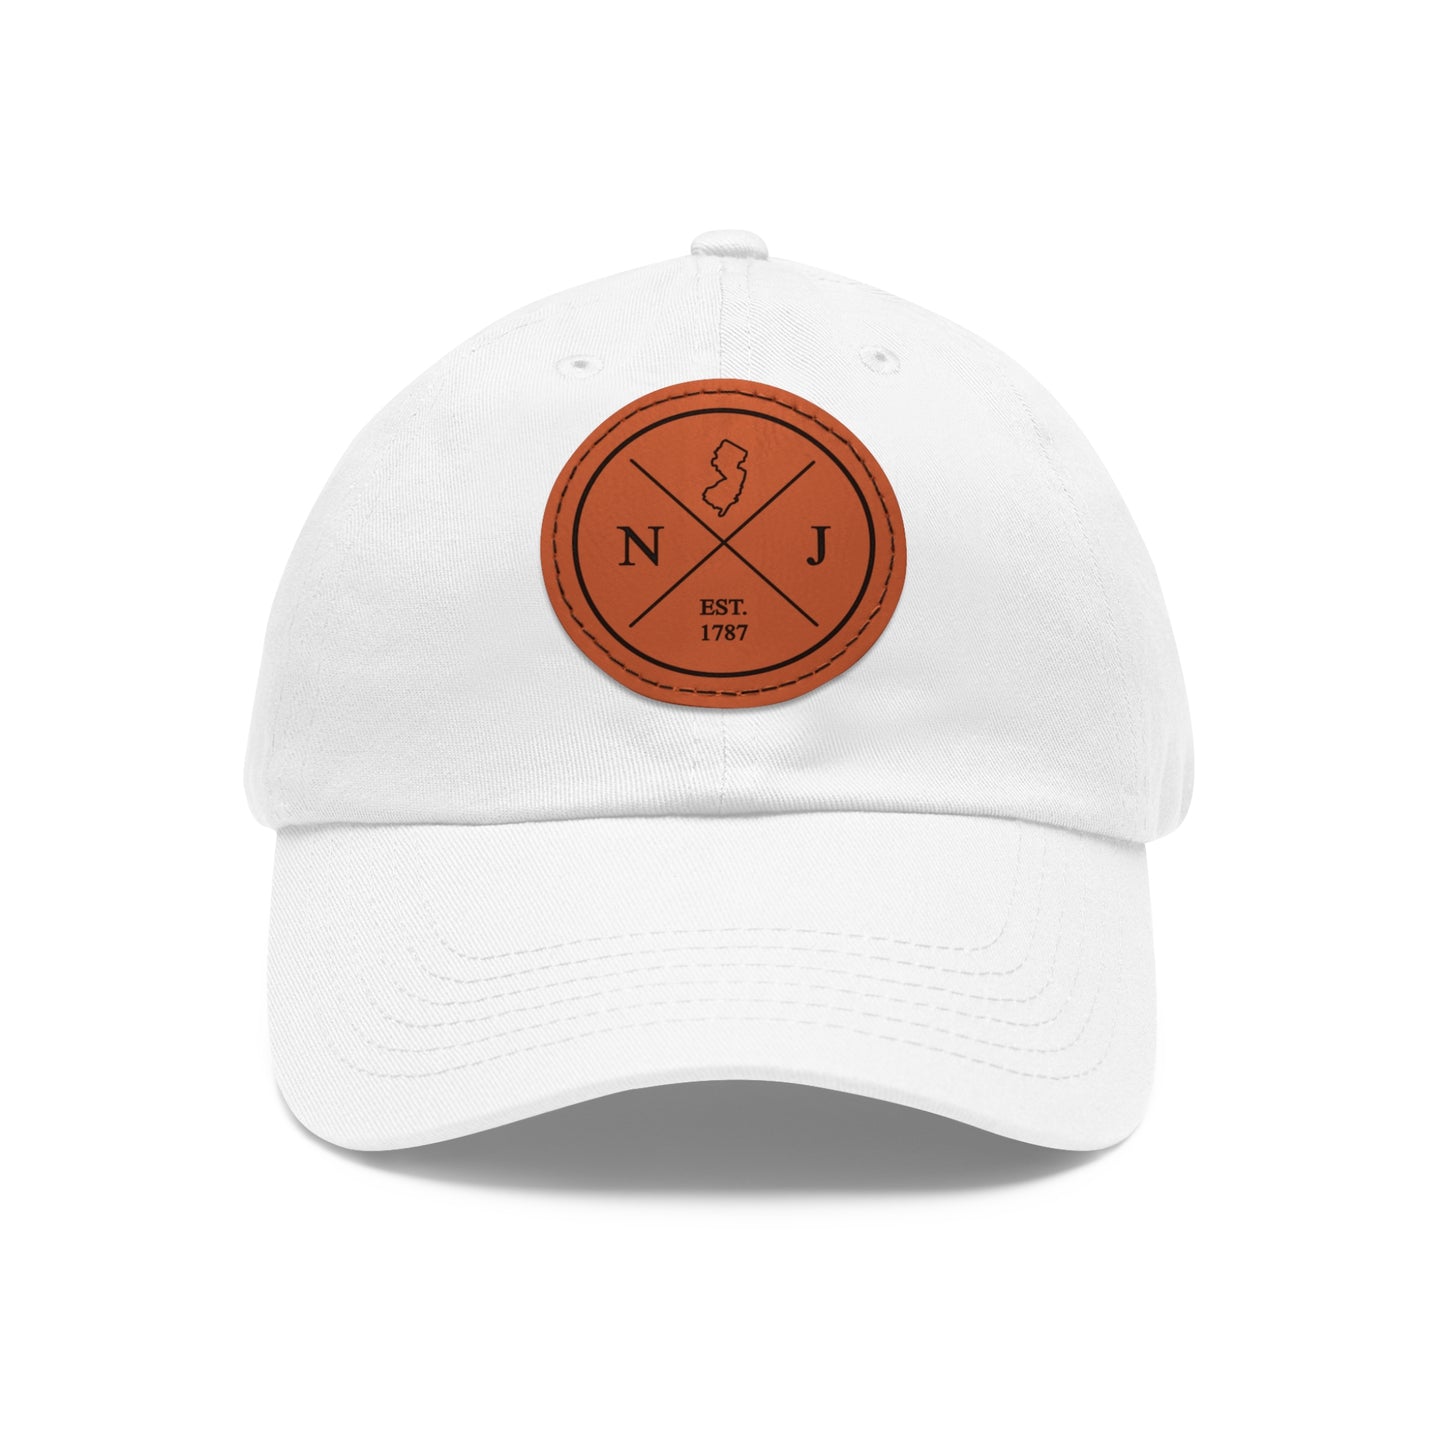 New Jersey Dad Hat with Leather Patch